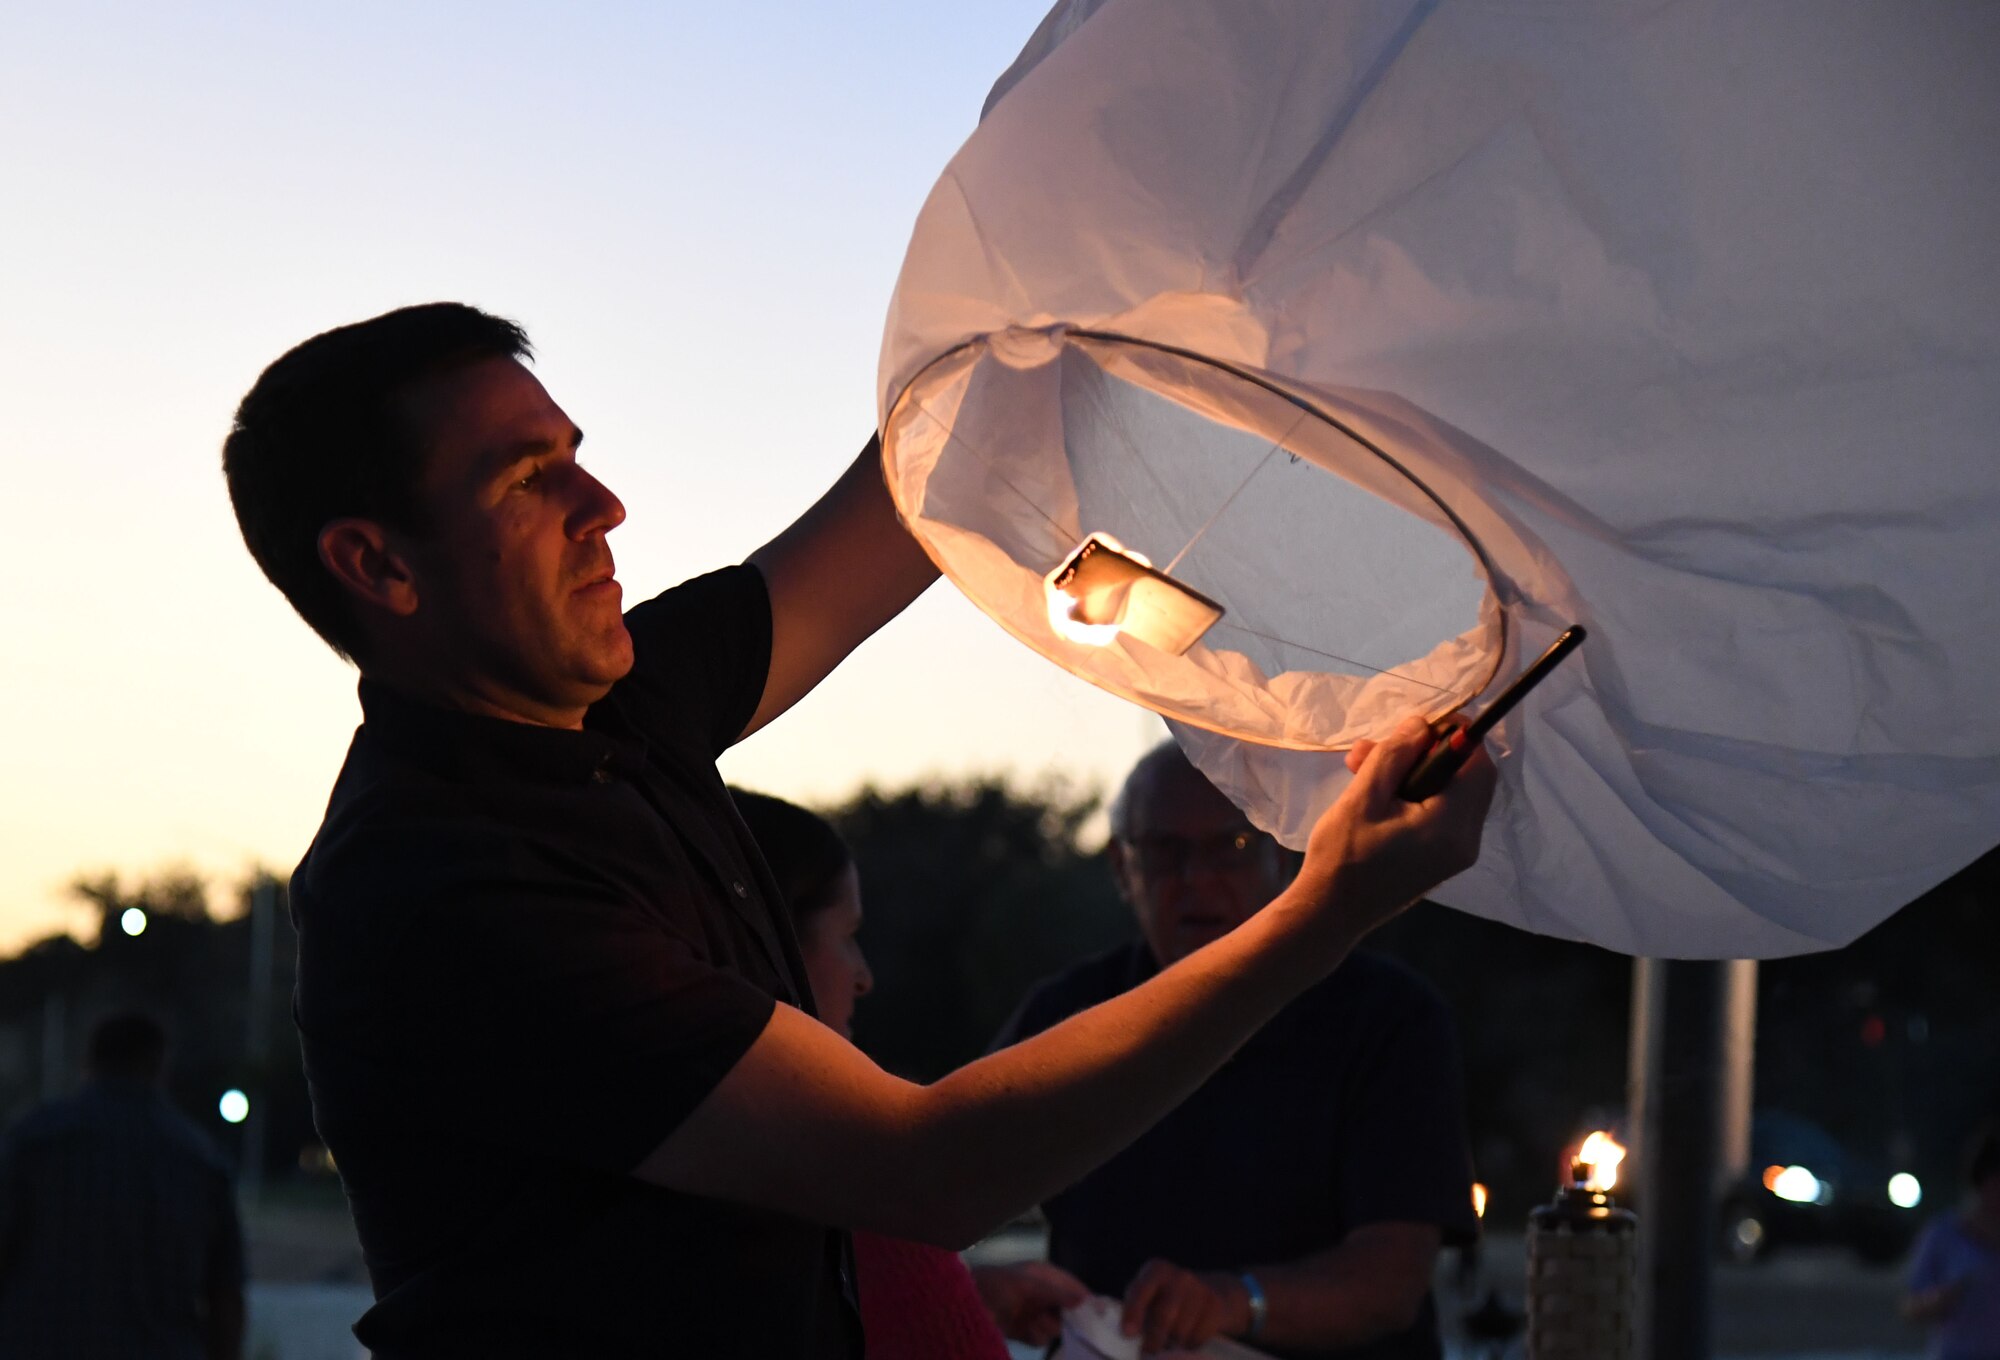 U.S. Air Force Col. Jason Allen, 81st Training Wing vice commander, lights a lantern during the Gold Star Families Sky Lantern Release on the Biloxi Beach, Mississippi, Sept. 23, 2022. The event, hosted by Keesler Air Force Base, included eco-friendly sky lanterns released in honor of fallen heroes. (U.S. Air Force photo by Kemberly Groue)